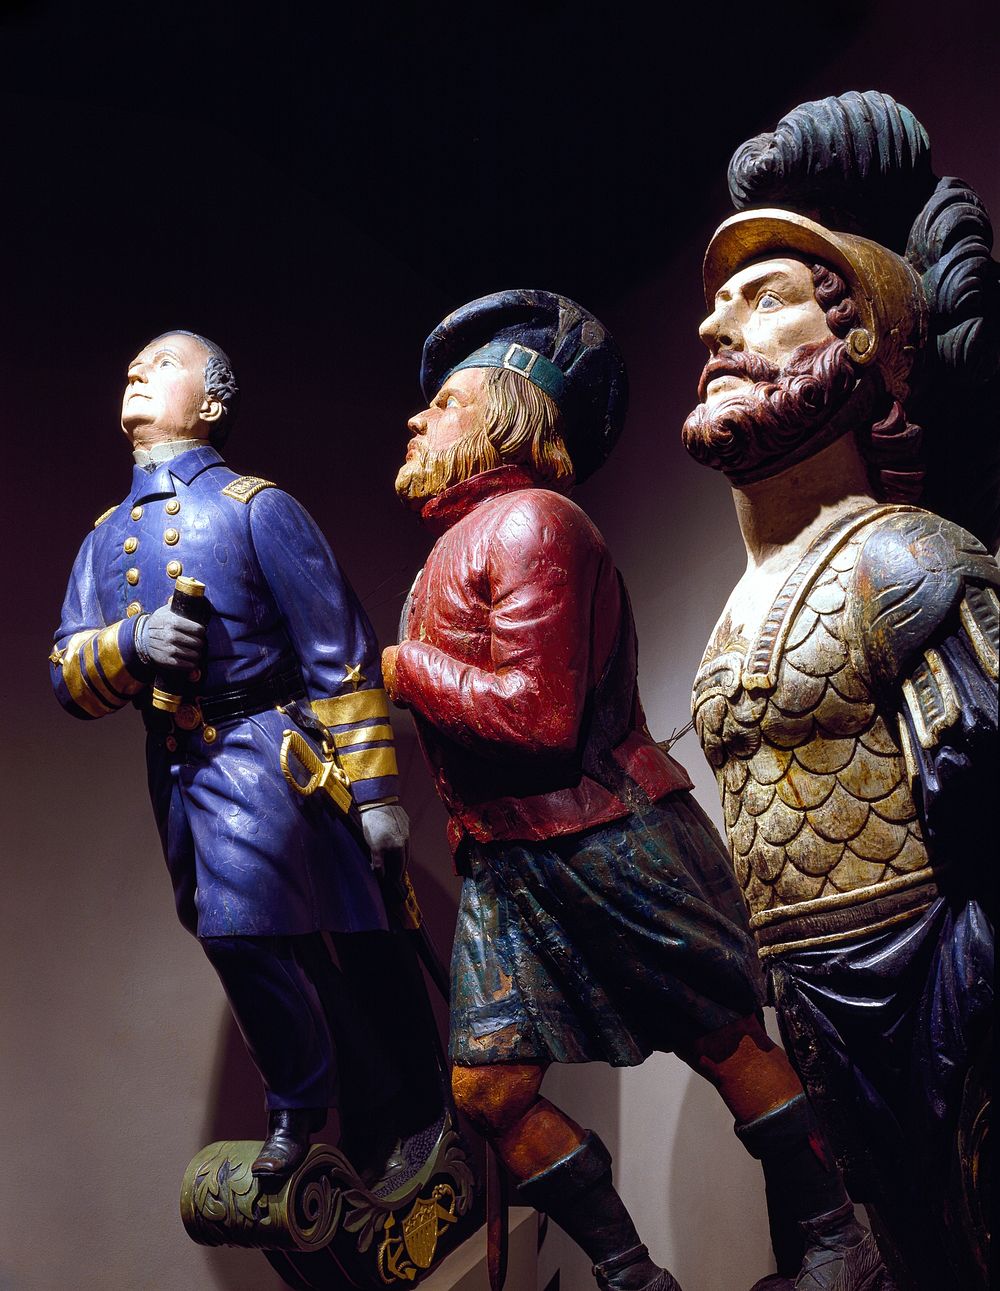 Connecticut wooden ship's figureheads at the Mystic Seaport Maritime Museum. Original image from Carol M. Highsmith&rsquo;s…